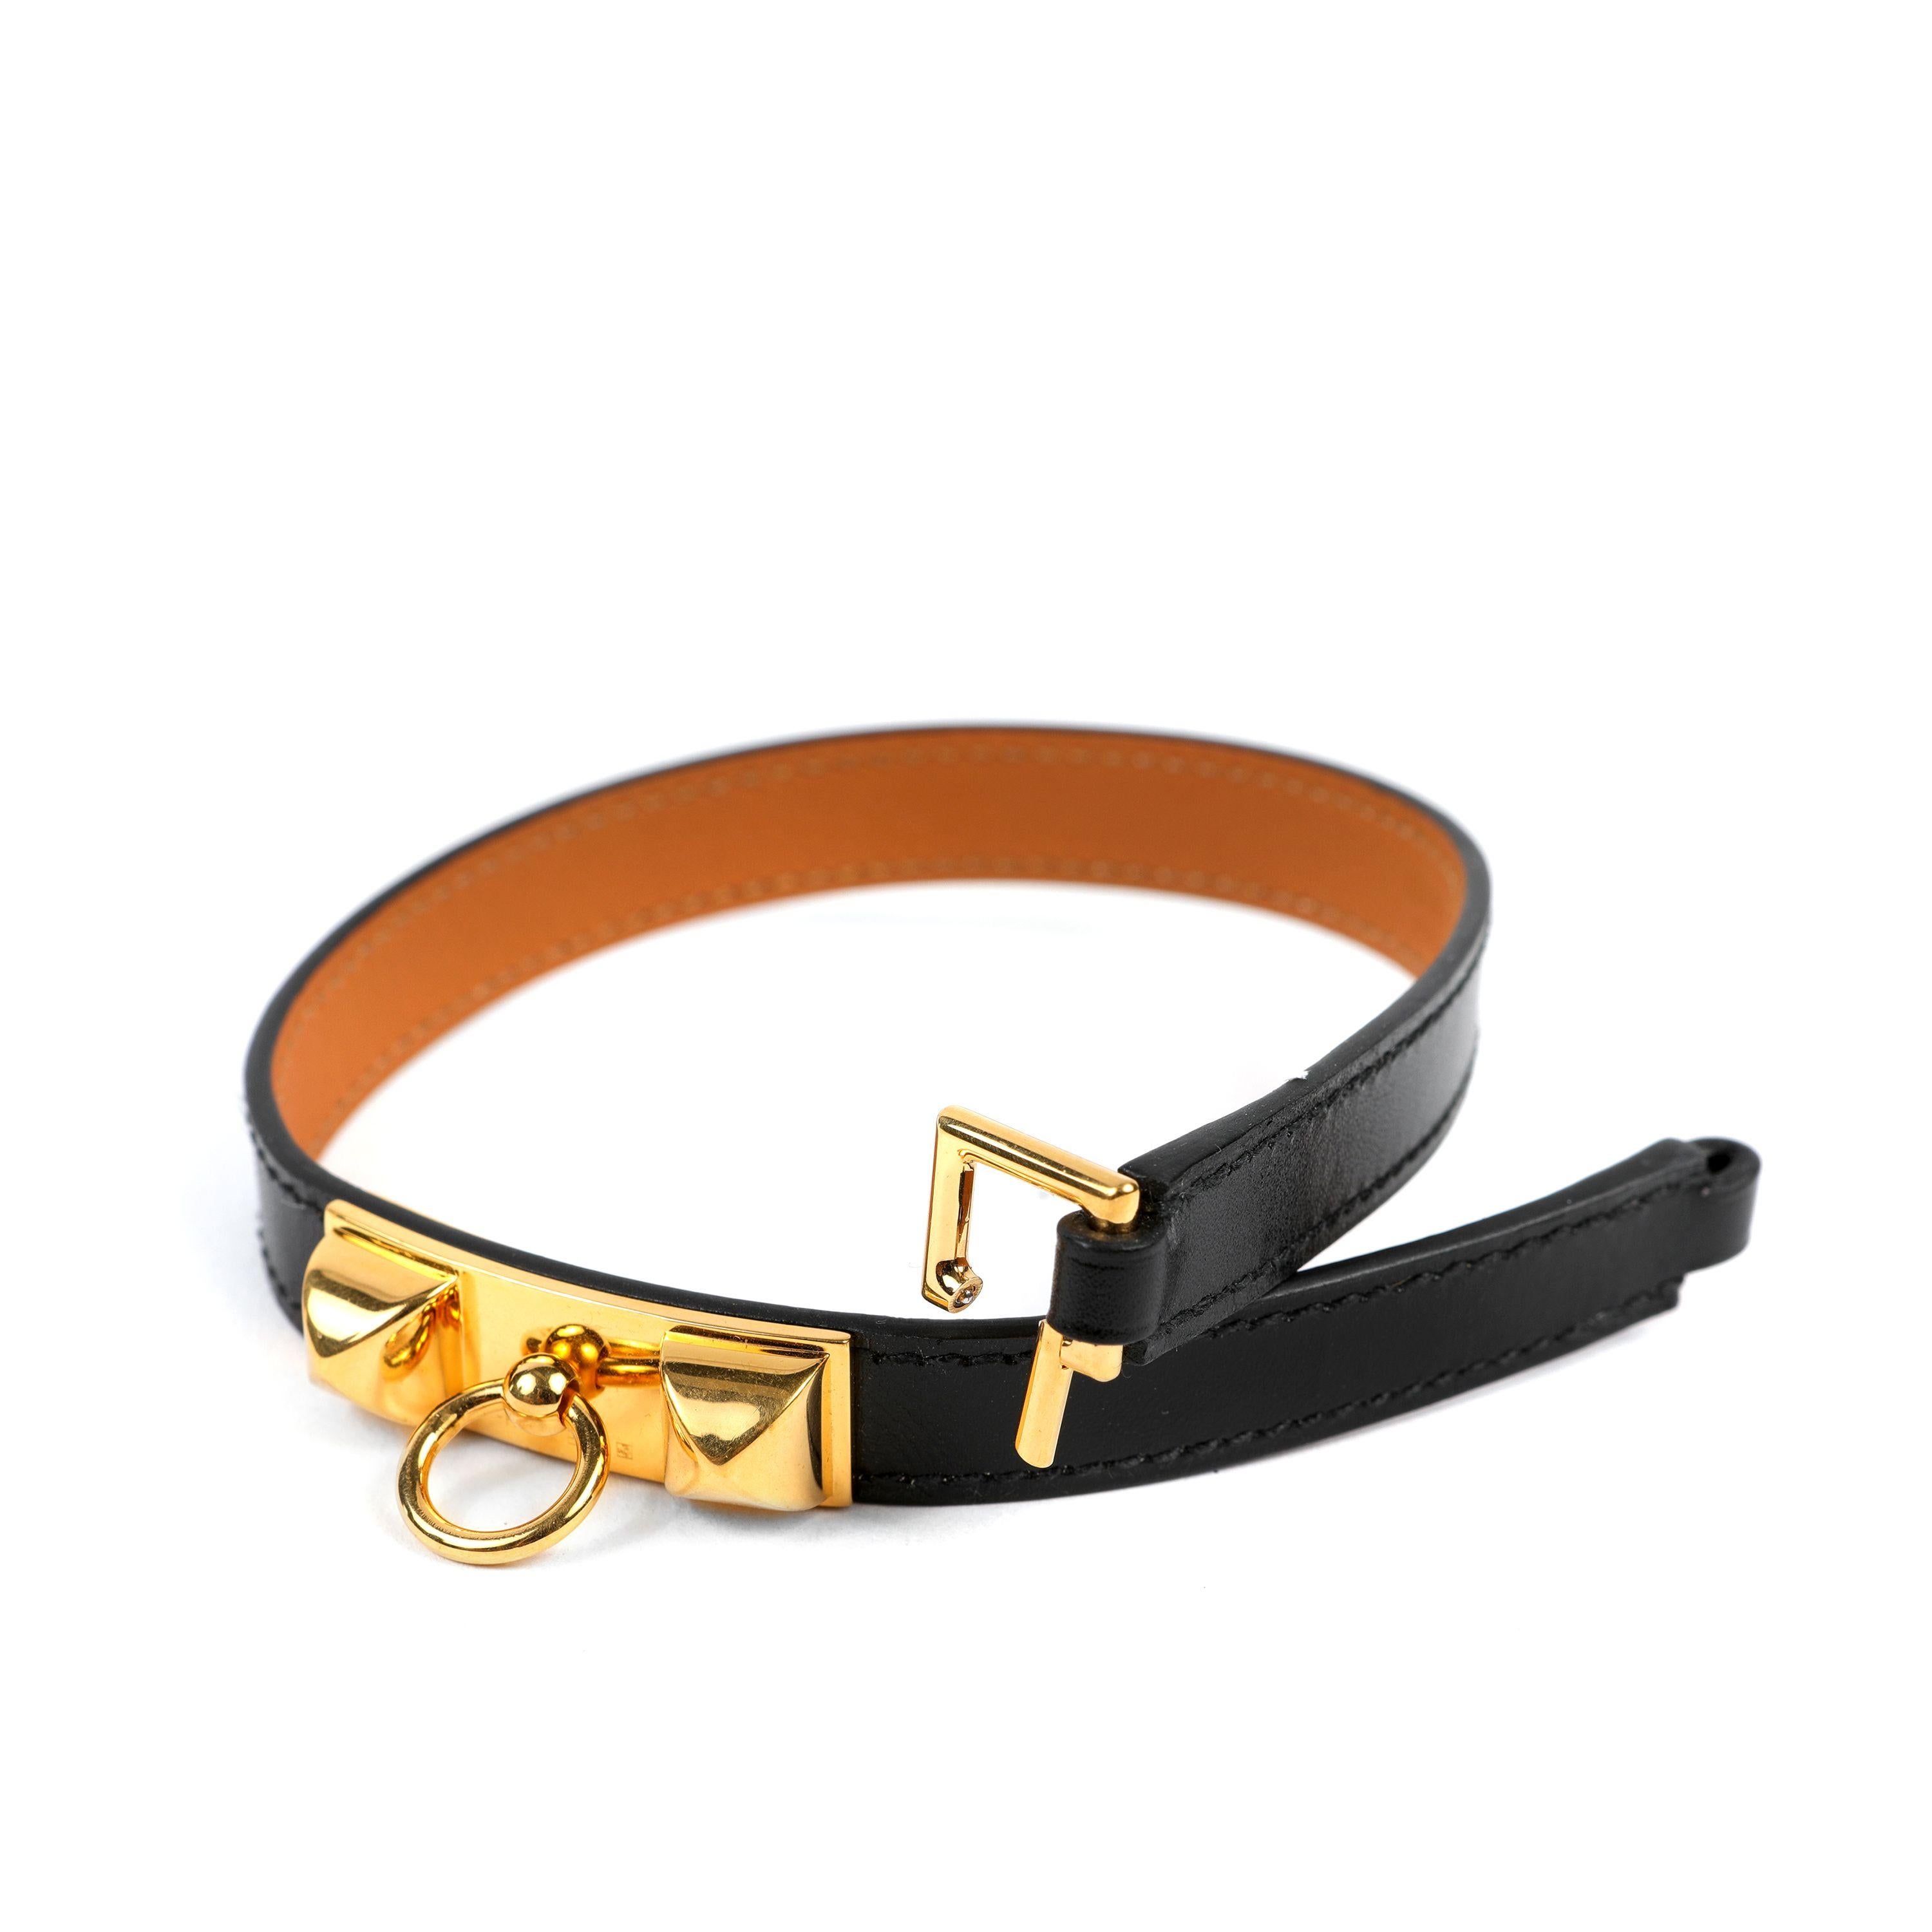 This authentic Hermès Black Rivale Double Tour Bracelet is in excellent condition.  Black leather is wrapped twice around the wrist and secured with a gold tone twist lock.

PBF 13642